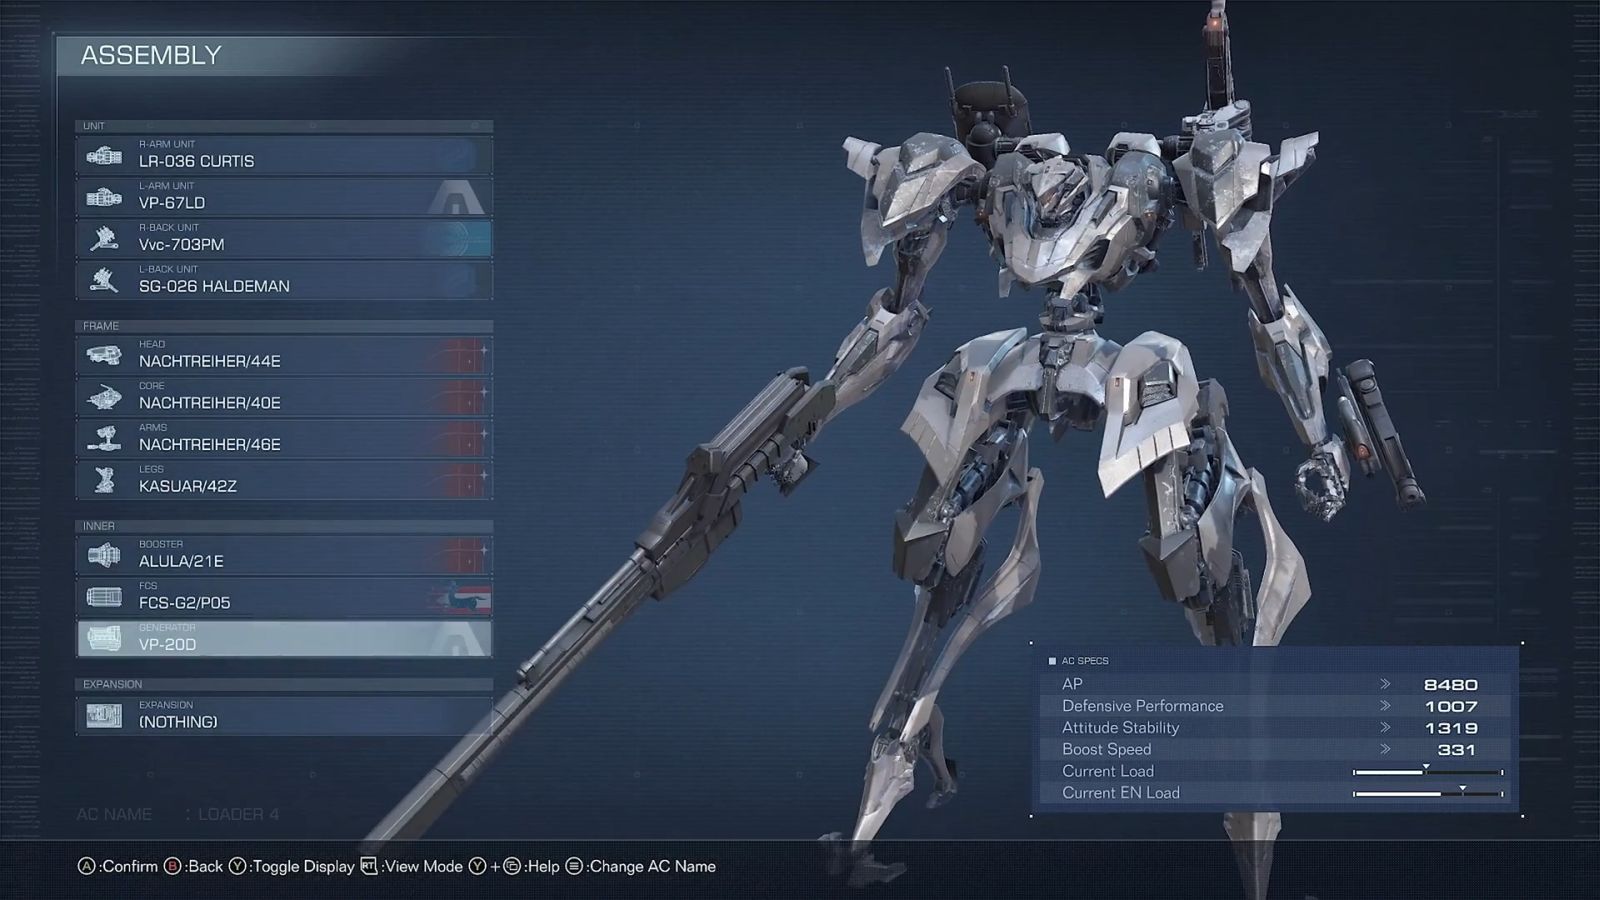 With Armored Core 6, FromSoftware has a chance to be cool again